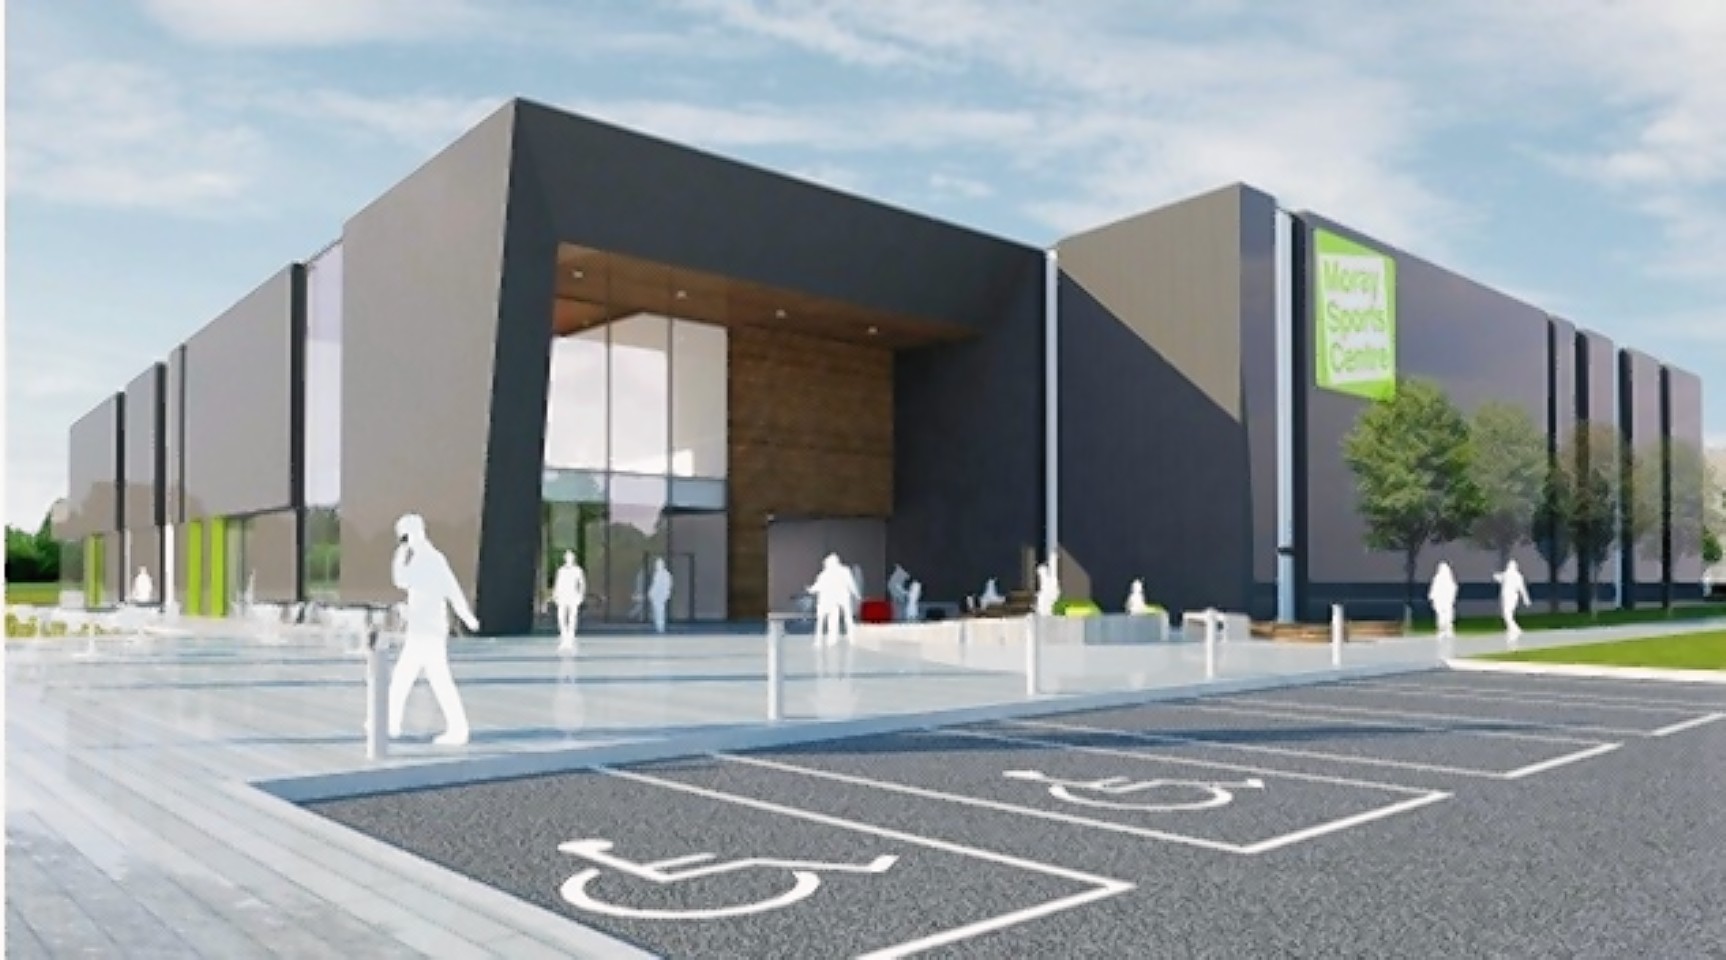 An artist's impression of how Moray Sports Centre may look